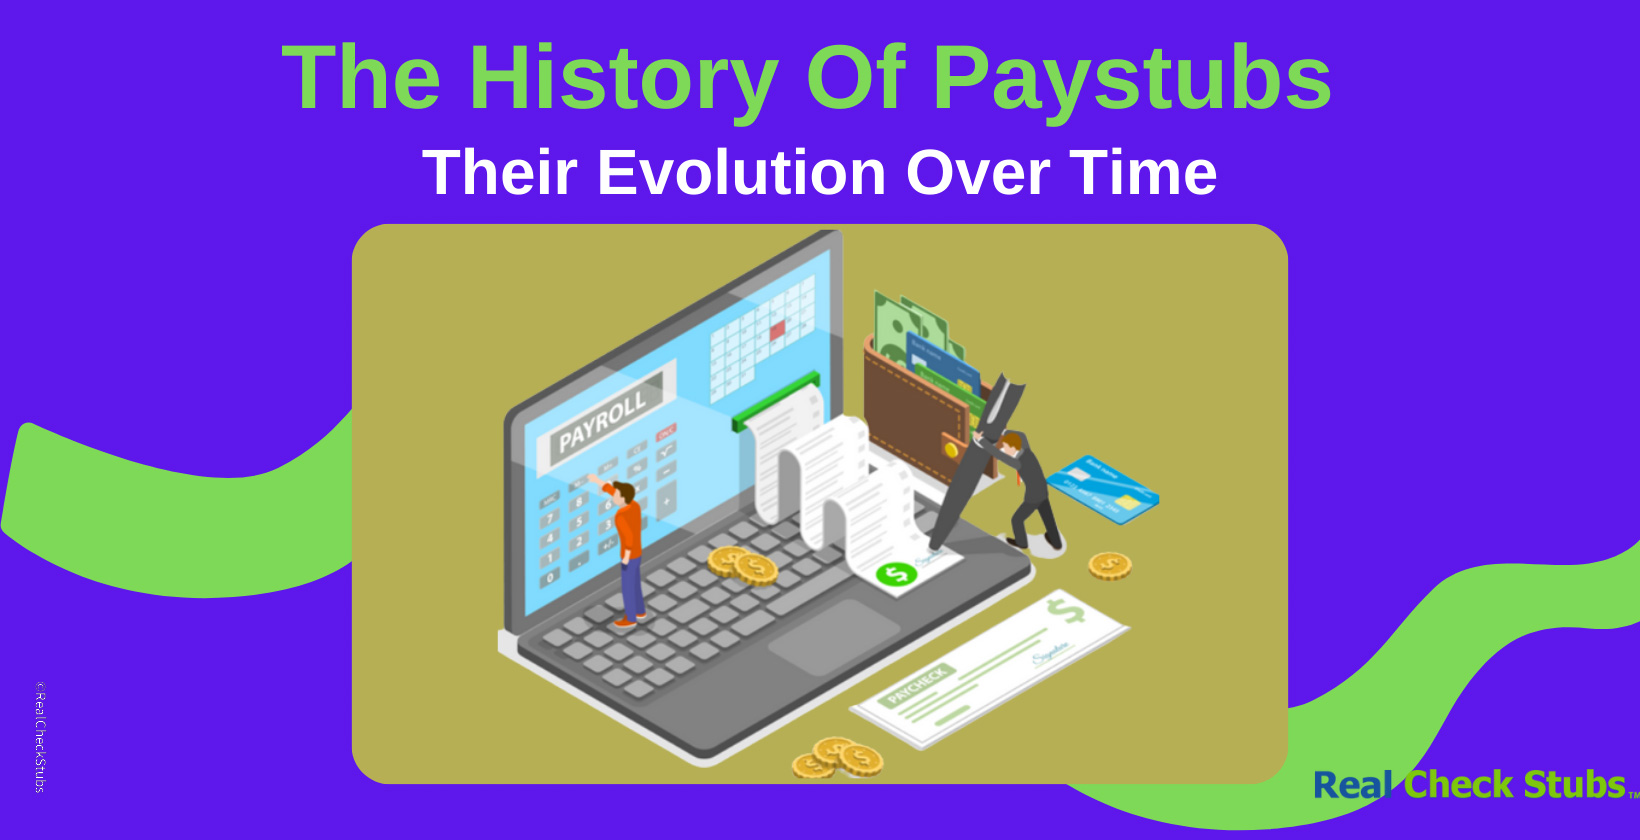 The History of Paystubs and Their Evolution Over Time